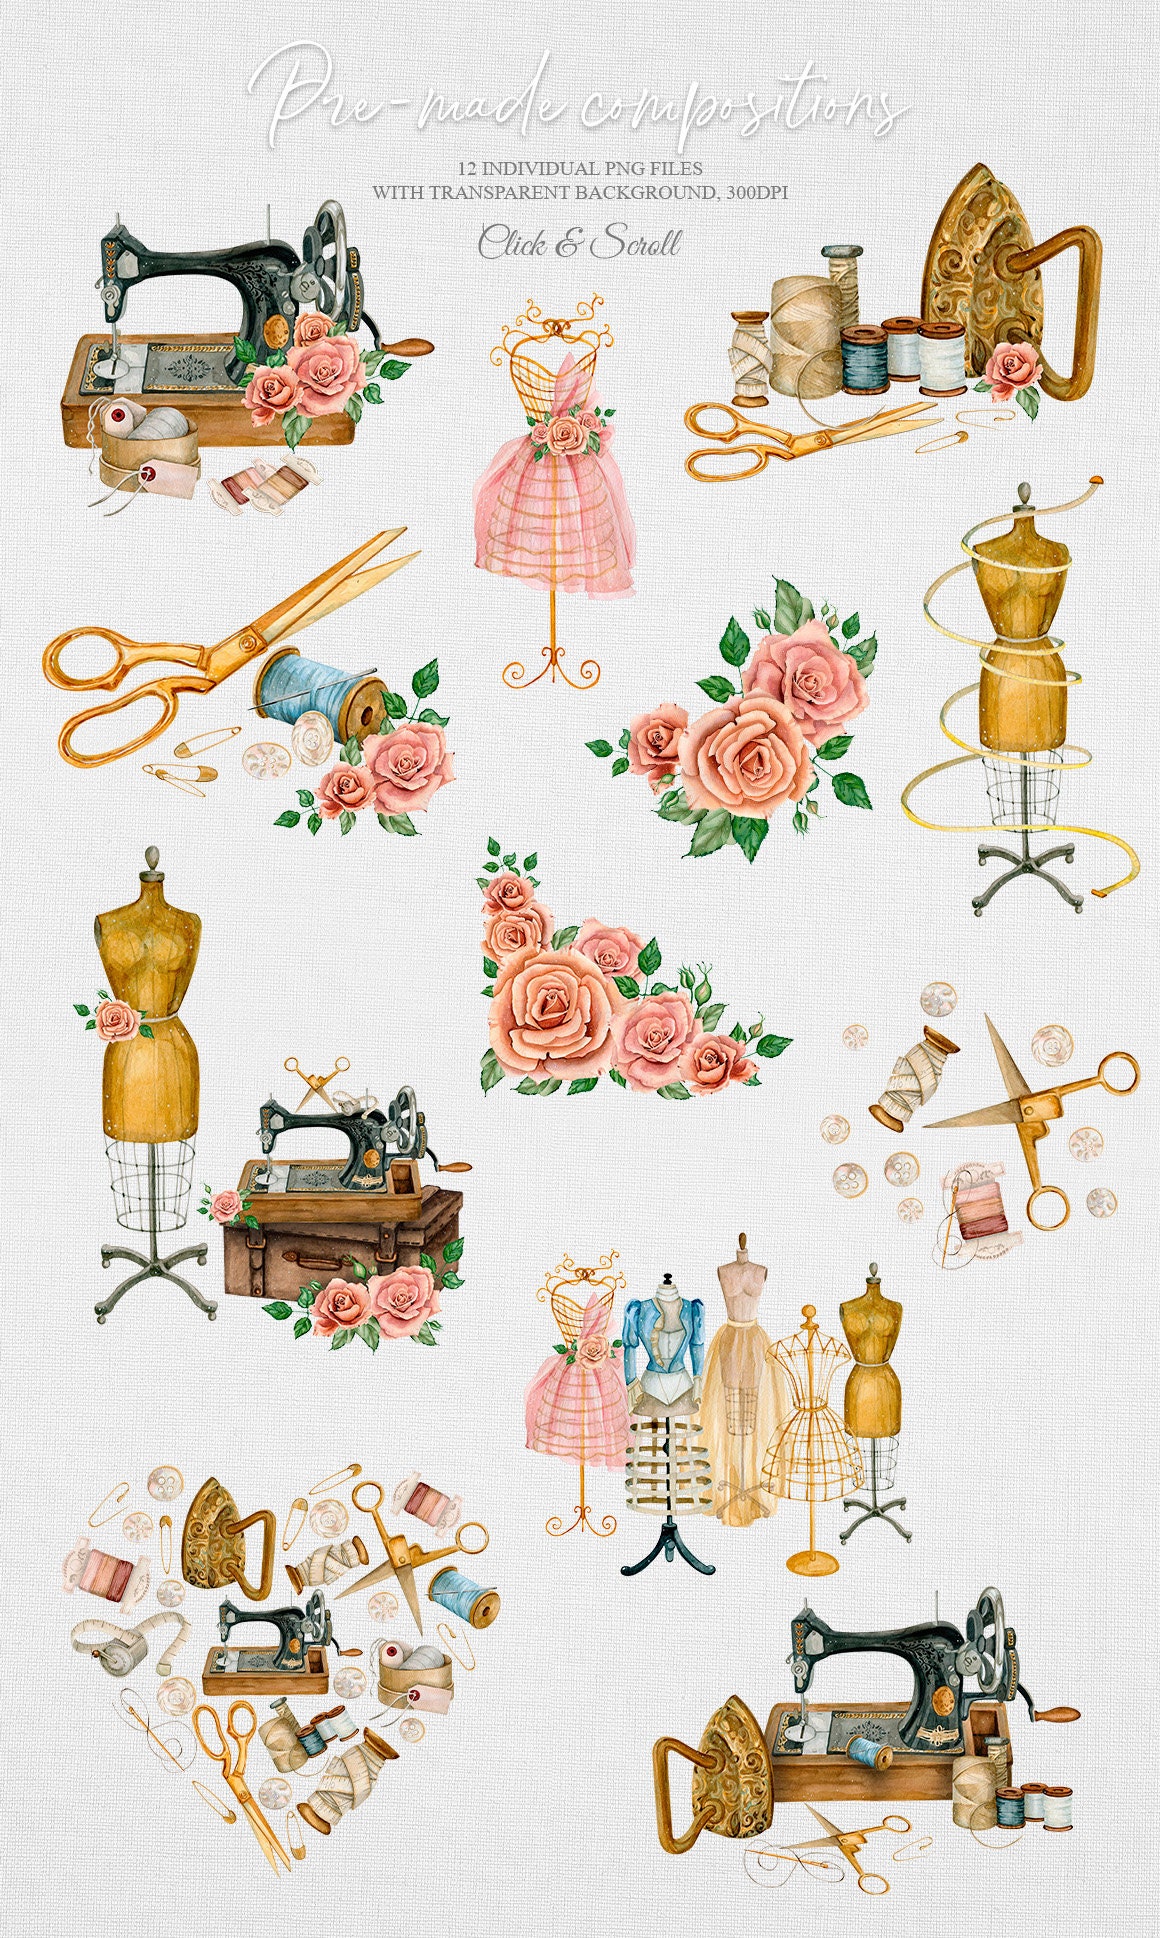 Watercolor Vintage Sewing Kit Clip Art Knitting Embroidery Sewing Sewing  Stock Illustration by ©dovgalyuk86 #371190190